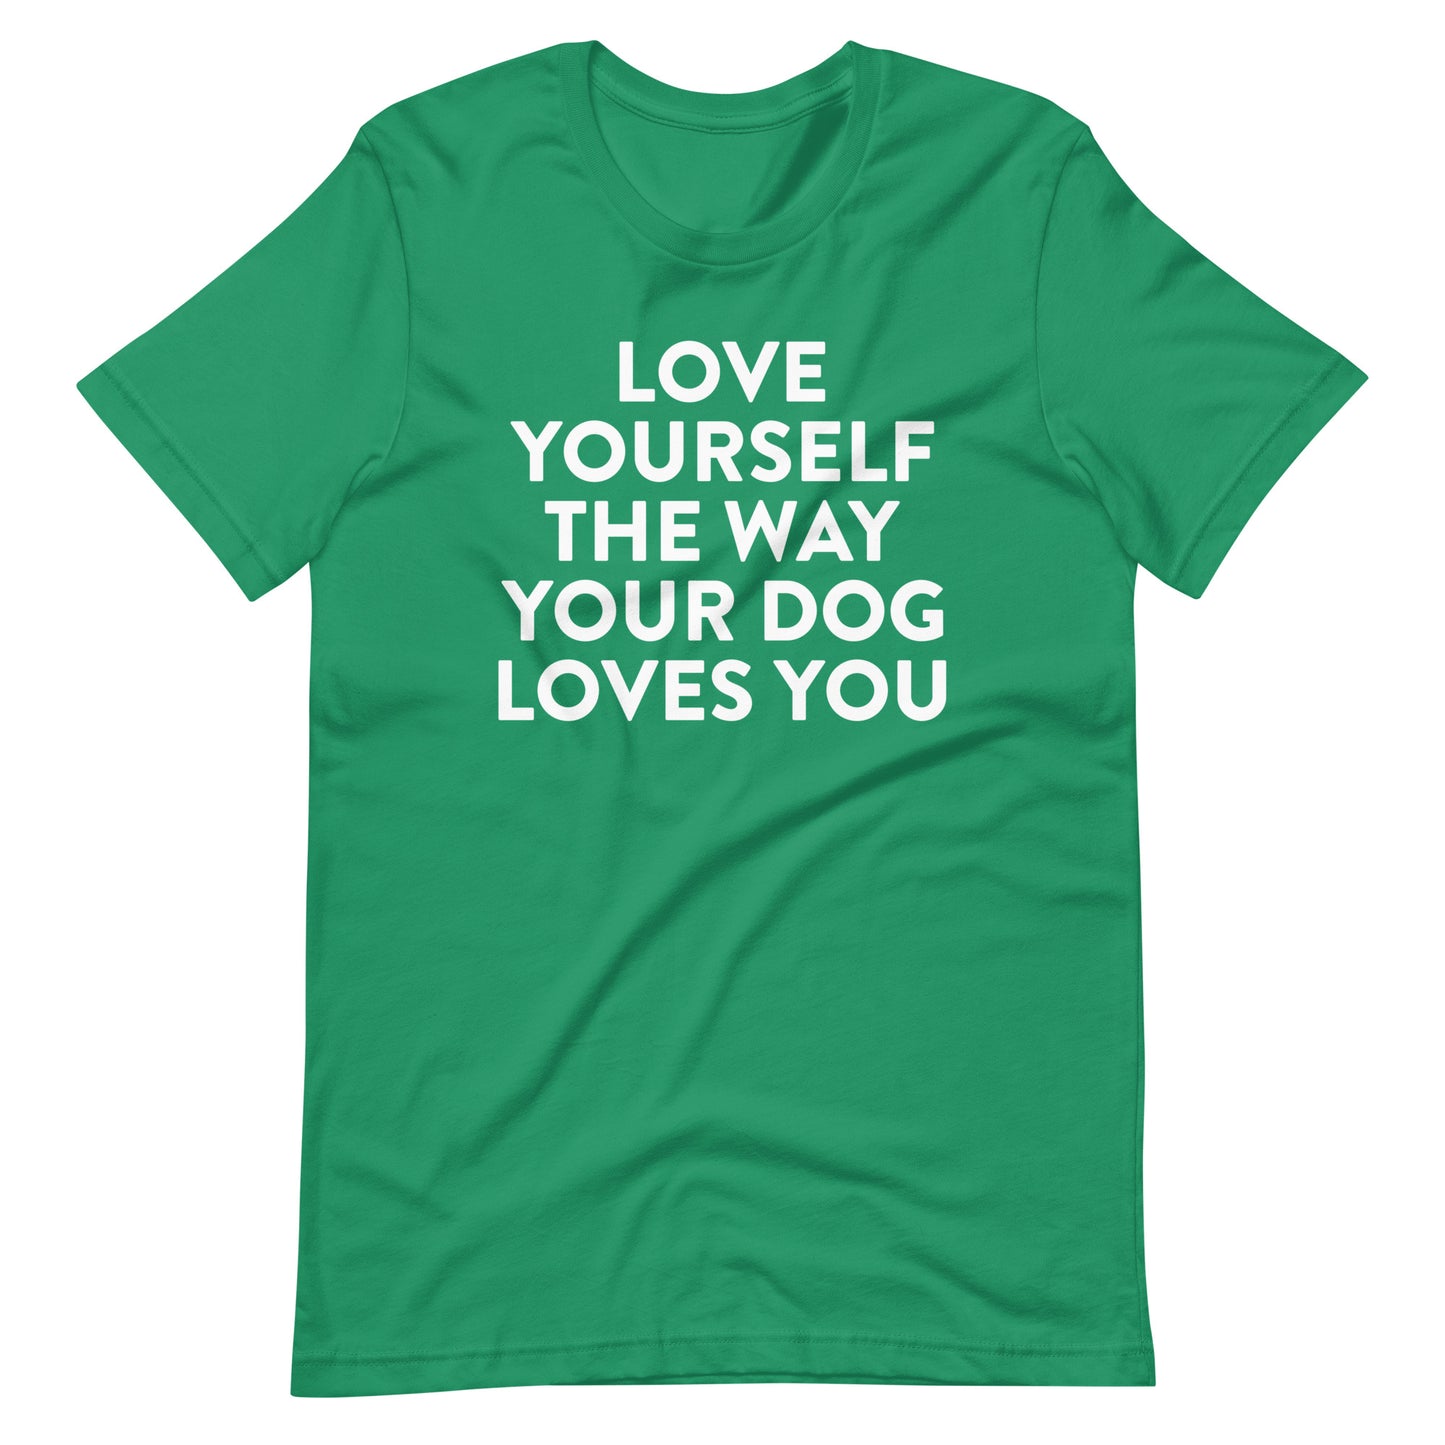 Love Yourself the Way Your Dog Loves You T-Shirt